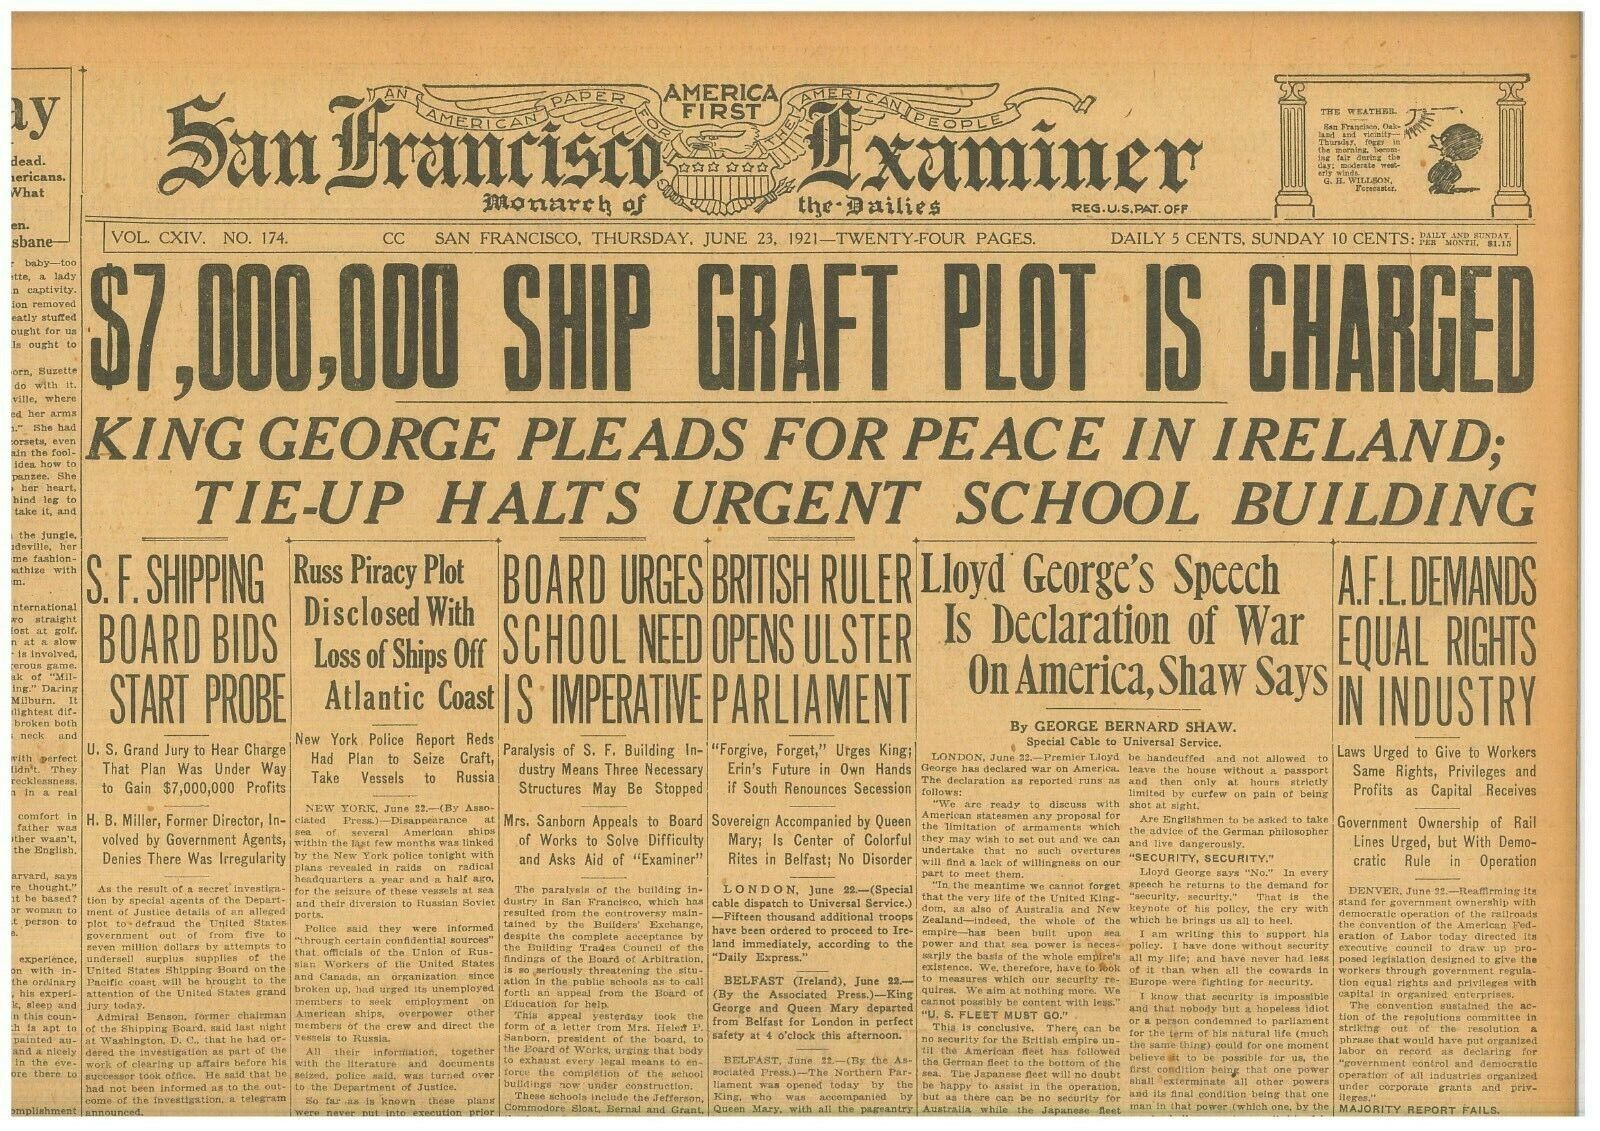 Ulster Peace in Ireland King George V Belfast Parliament Opens 23 June 1921 B36